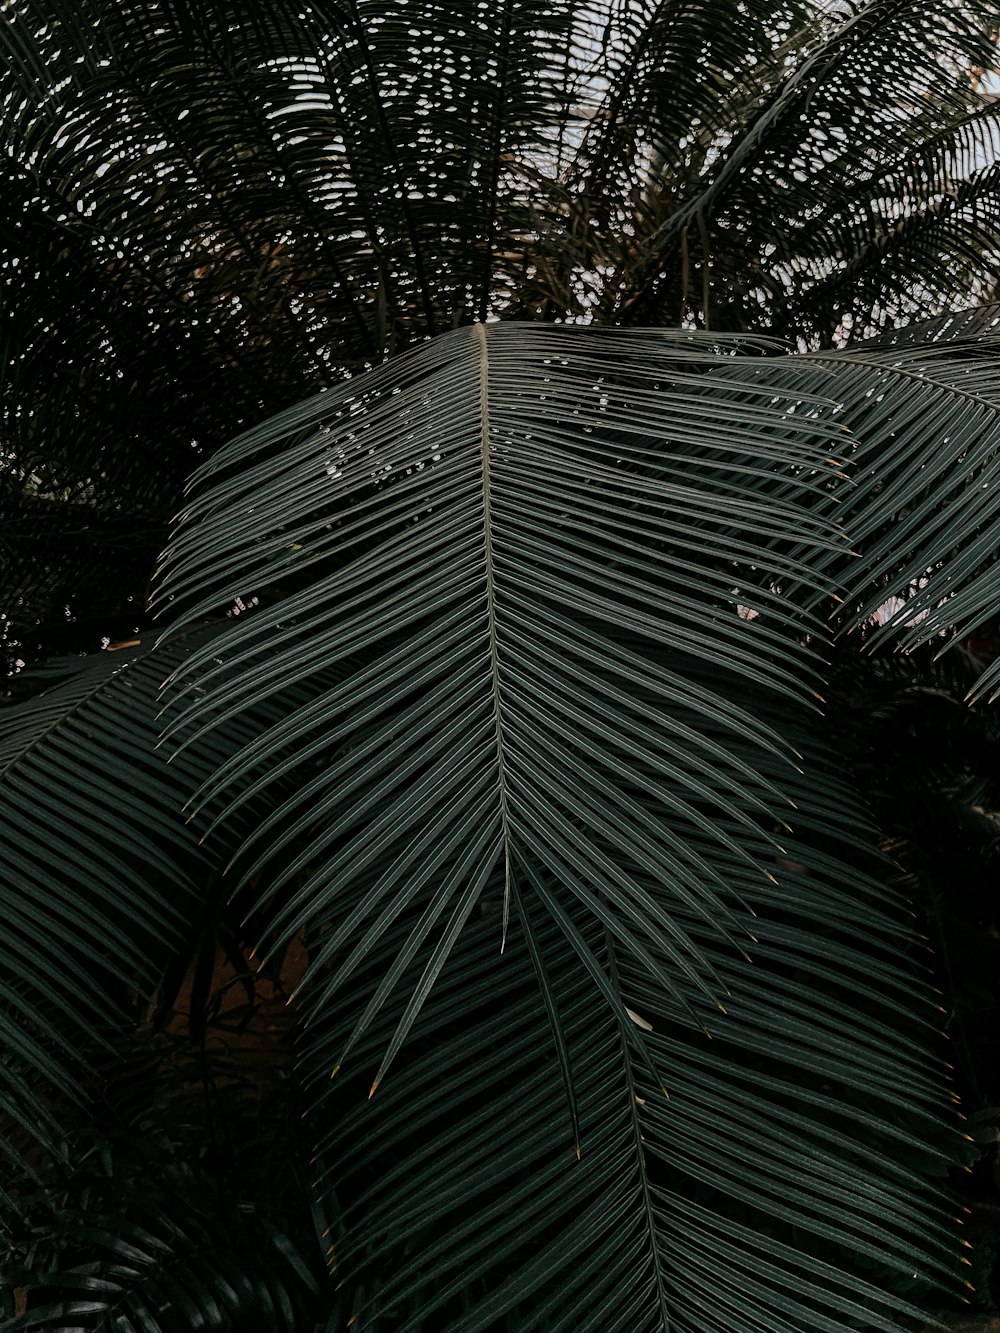 a large palm tree with lots of green leaves